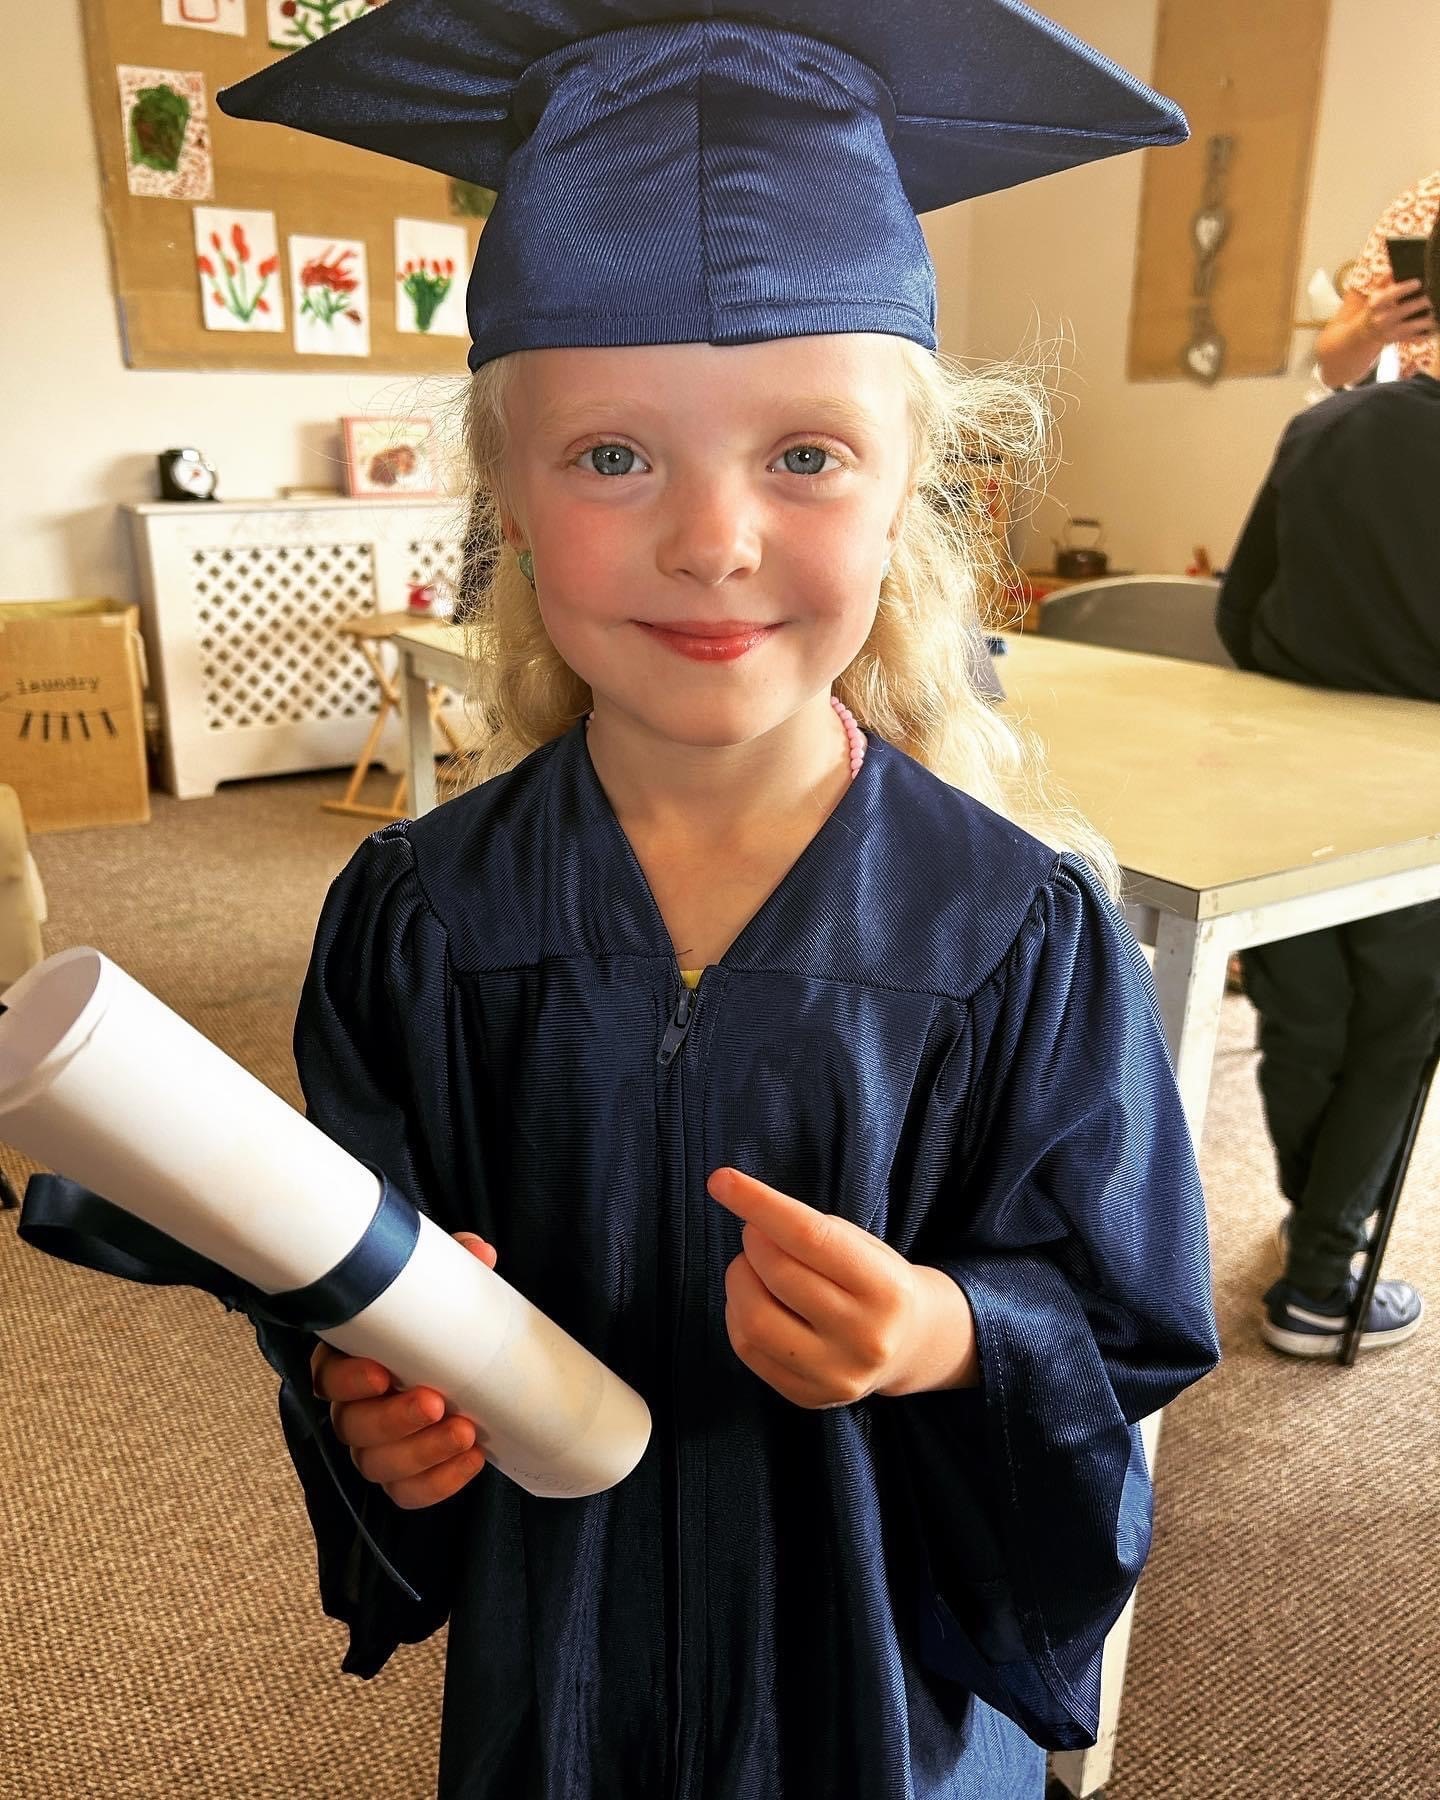 Corwen Day Nursery graduate Megans wants to follow in both her mother’s and grandmother’s footsteps and be a teacher.